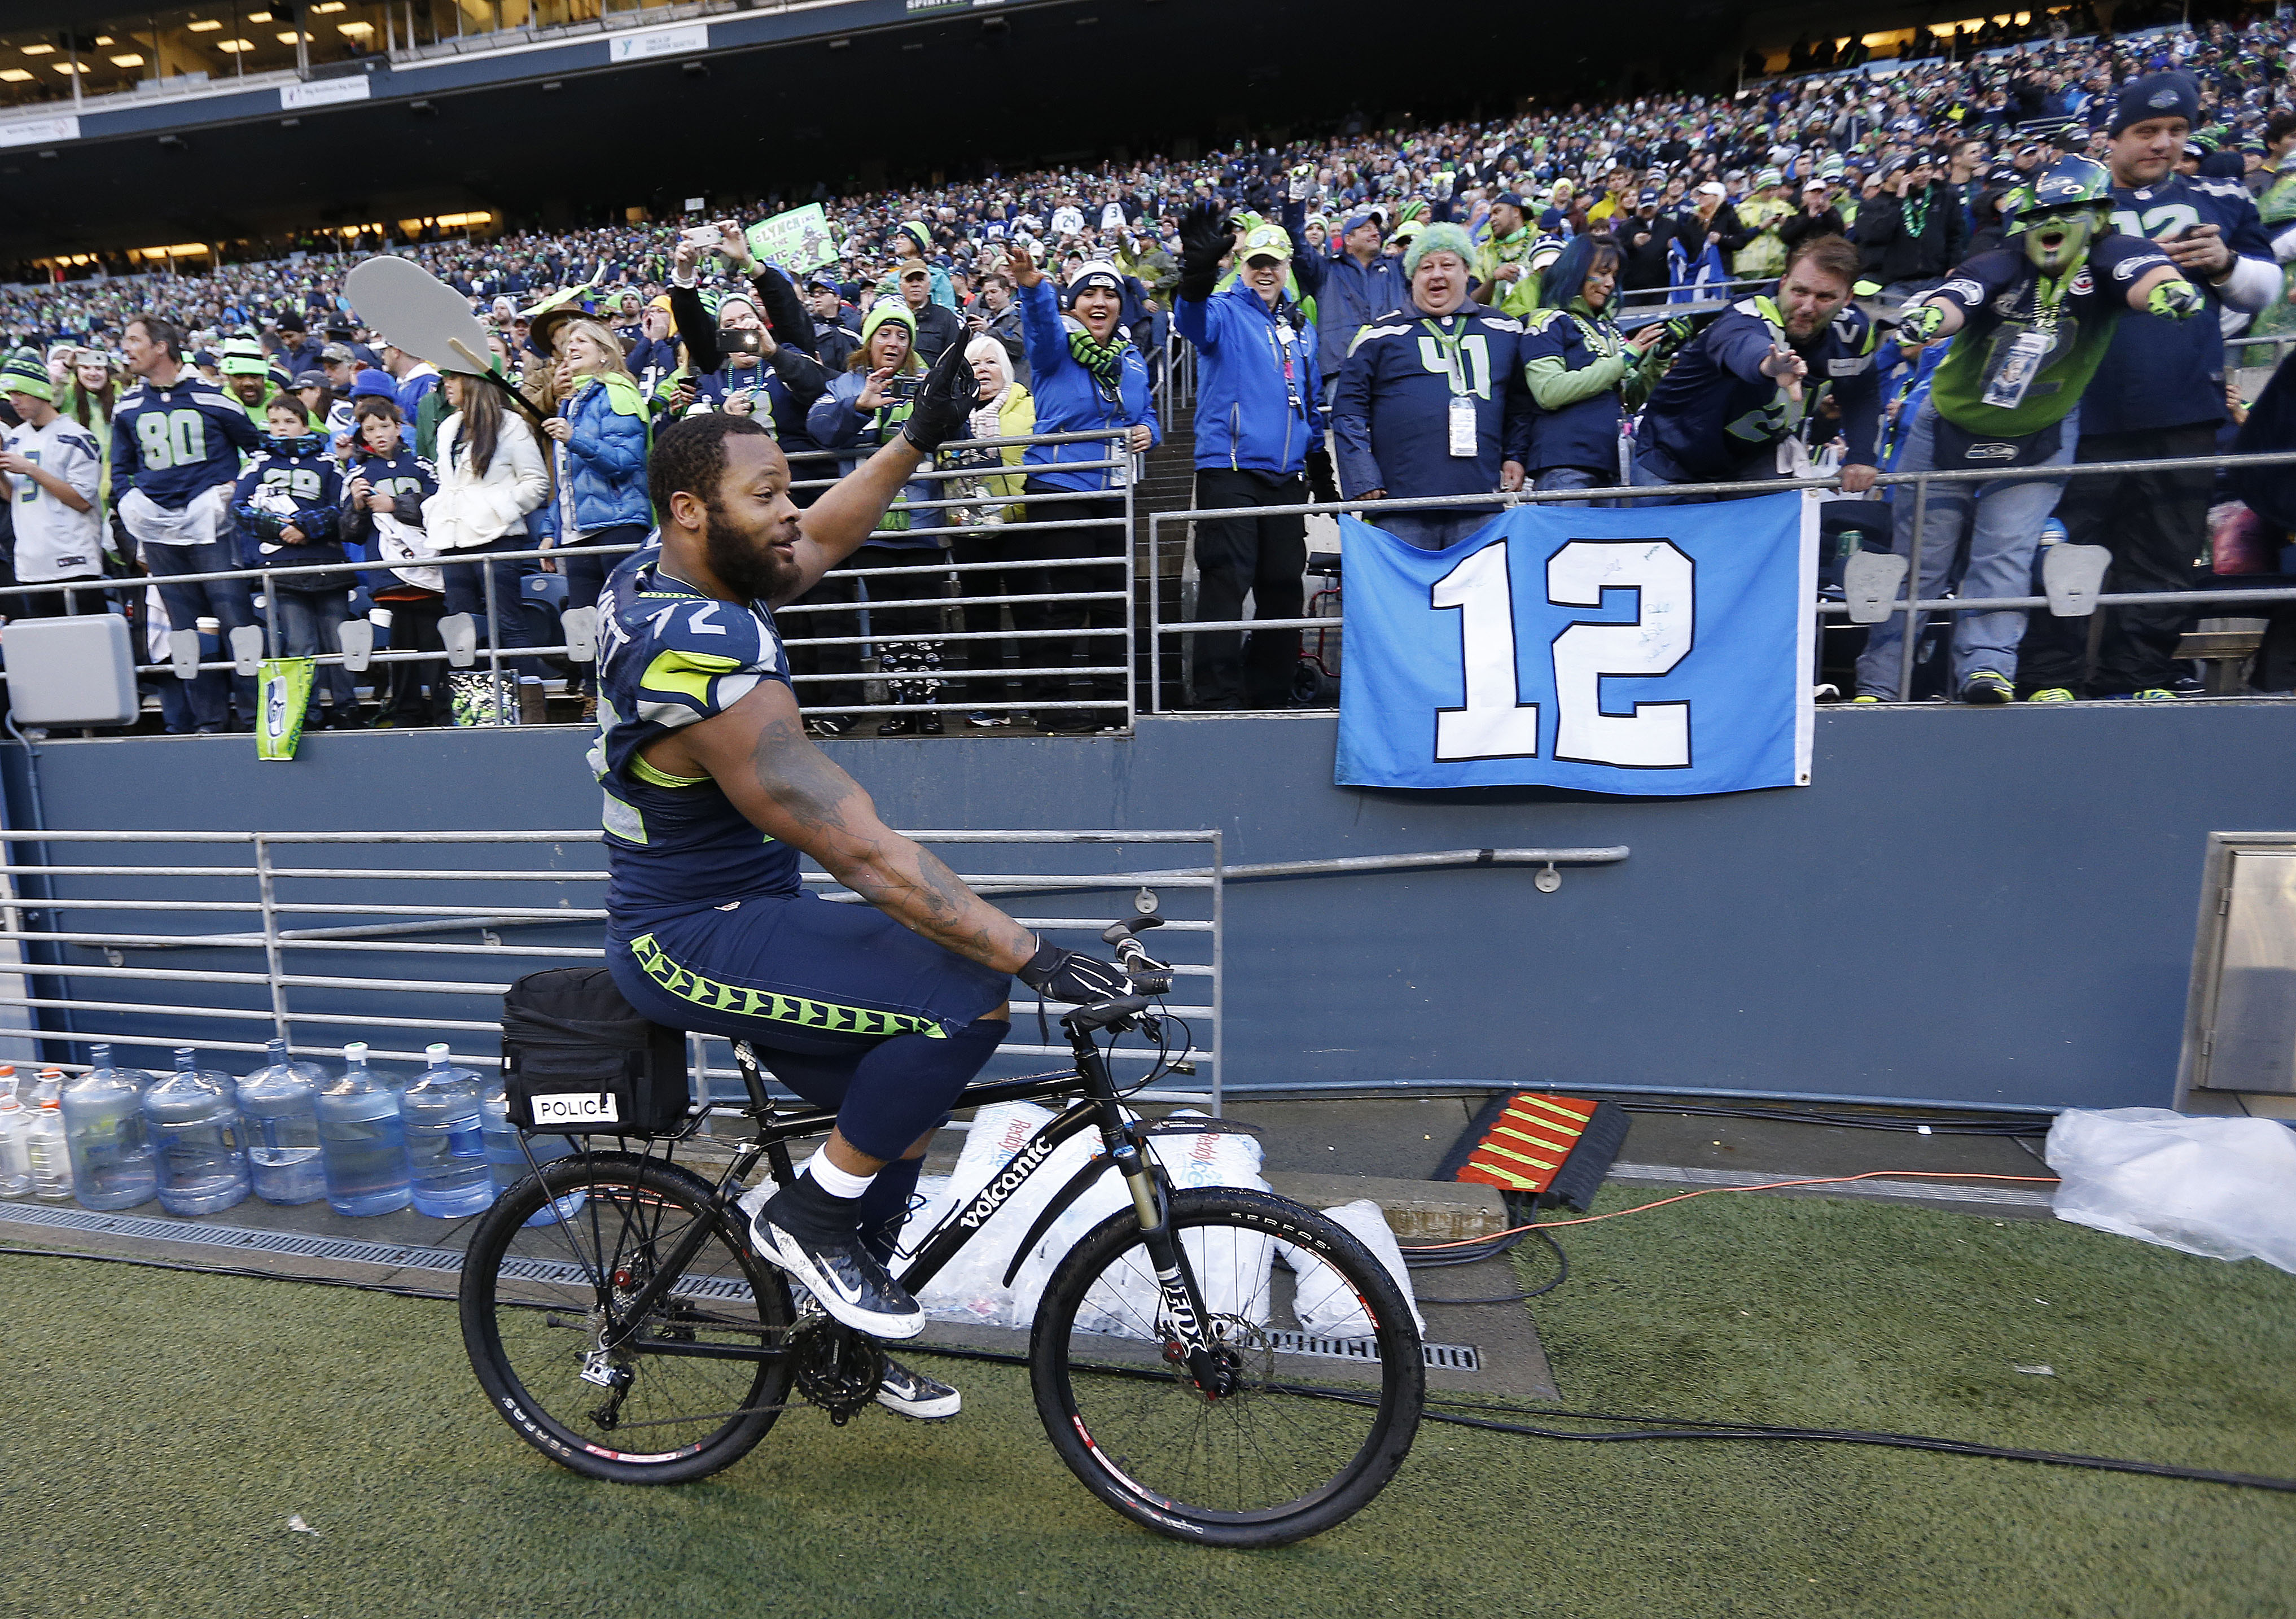 Seahawks DE Bennett celebrates with bicycle ride